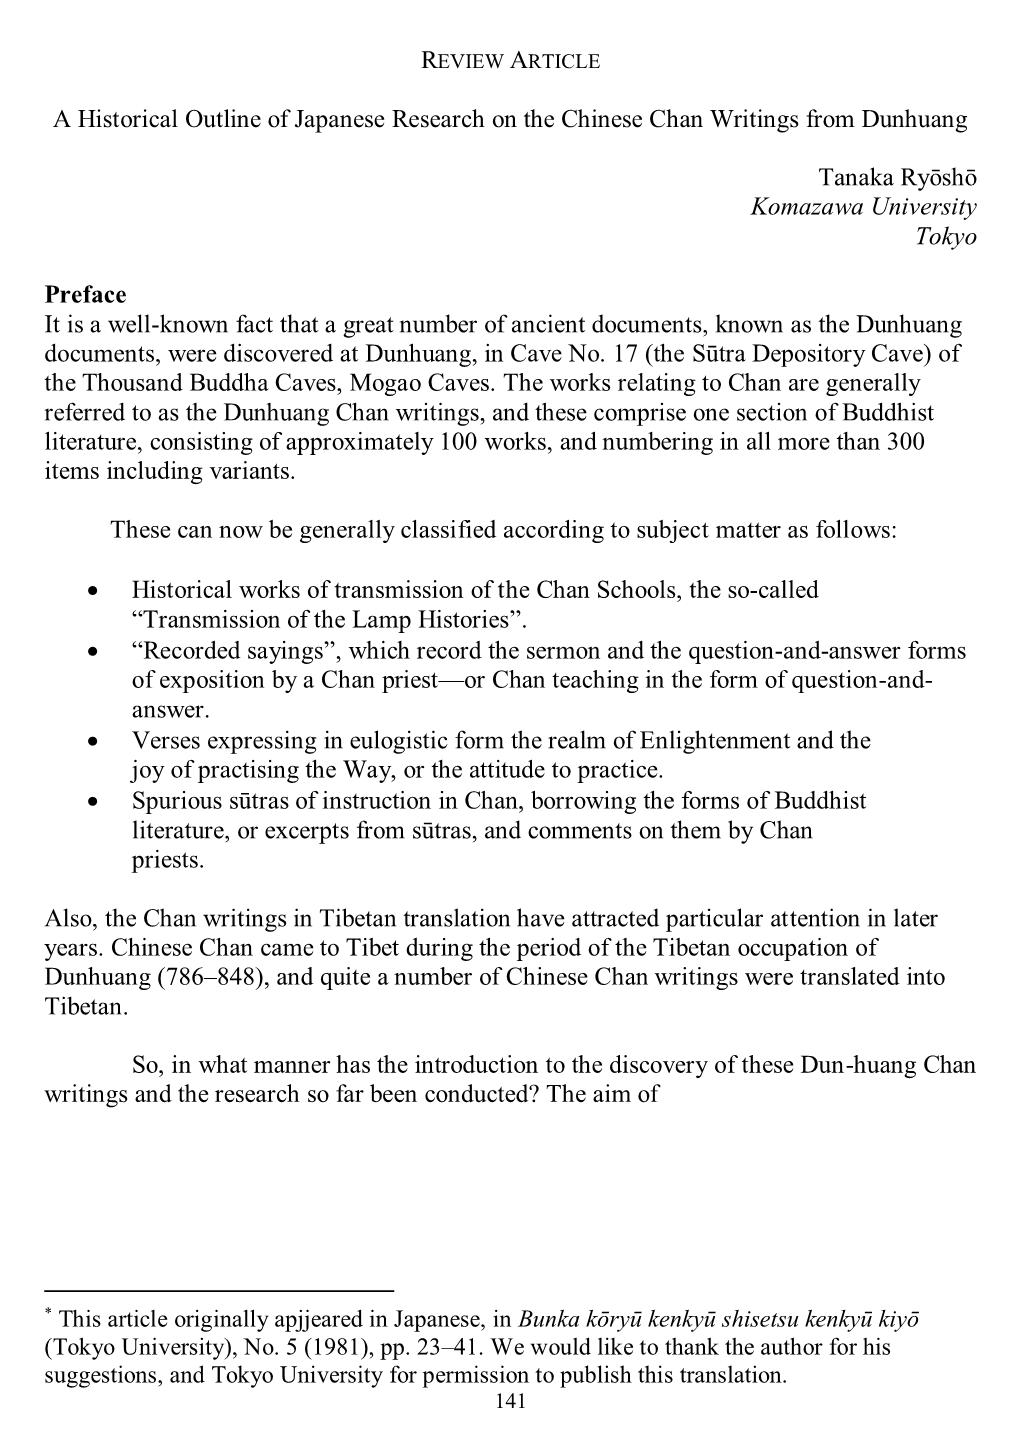 A Historical Outline of Japanese Research on the Chinese Chan Writings from Dunhuang